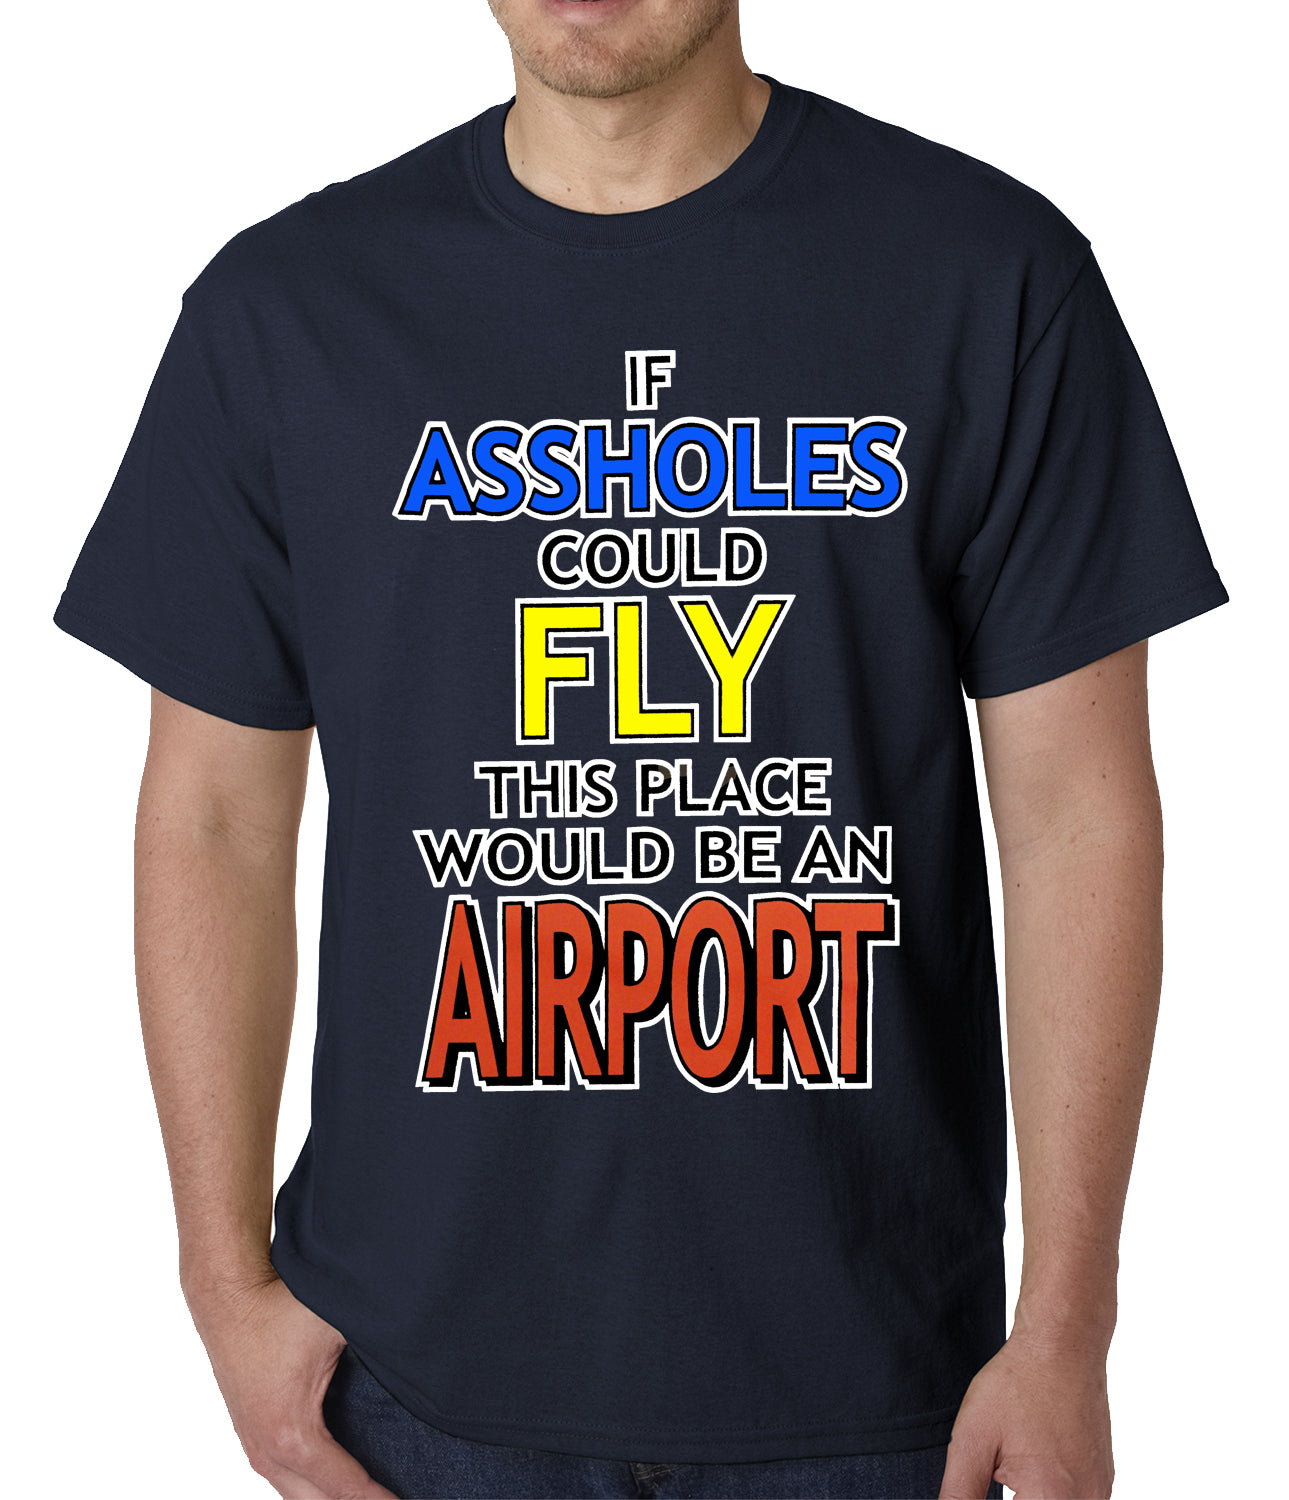 If assholes could fly t shirt